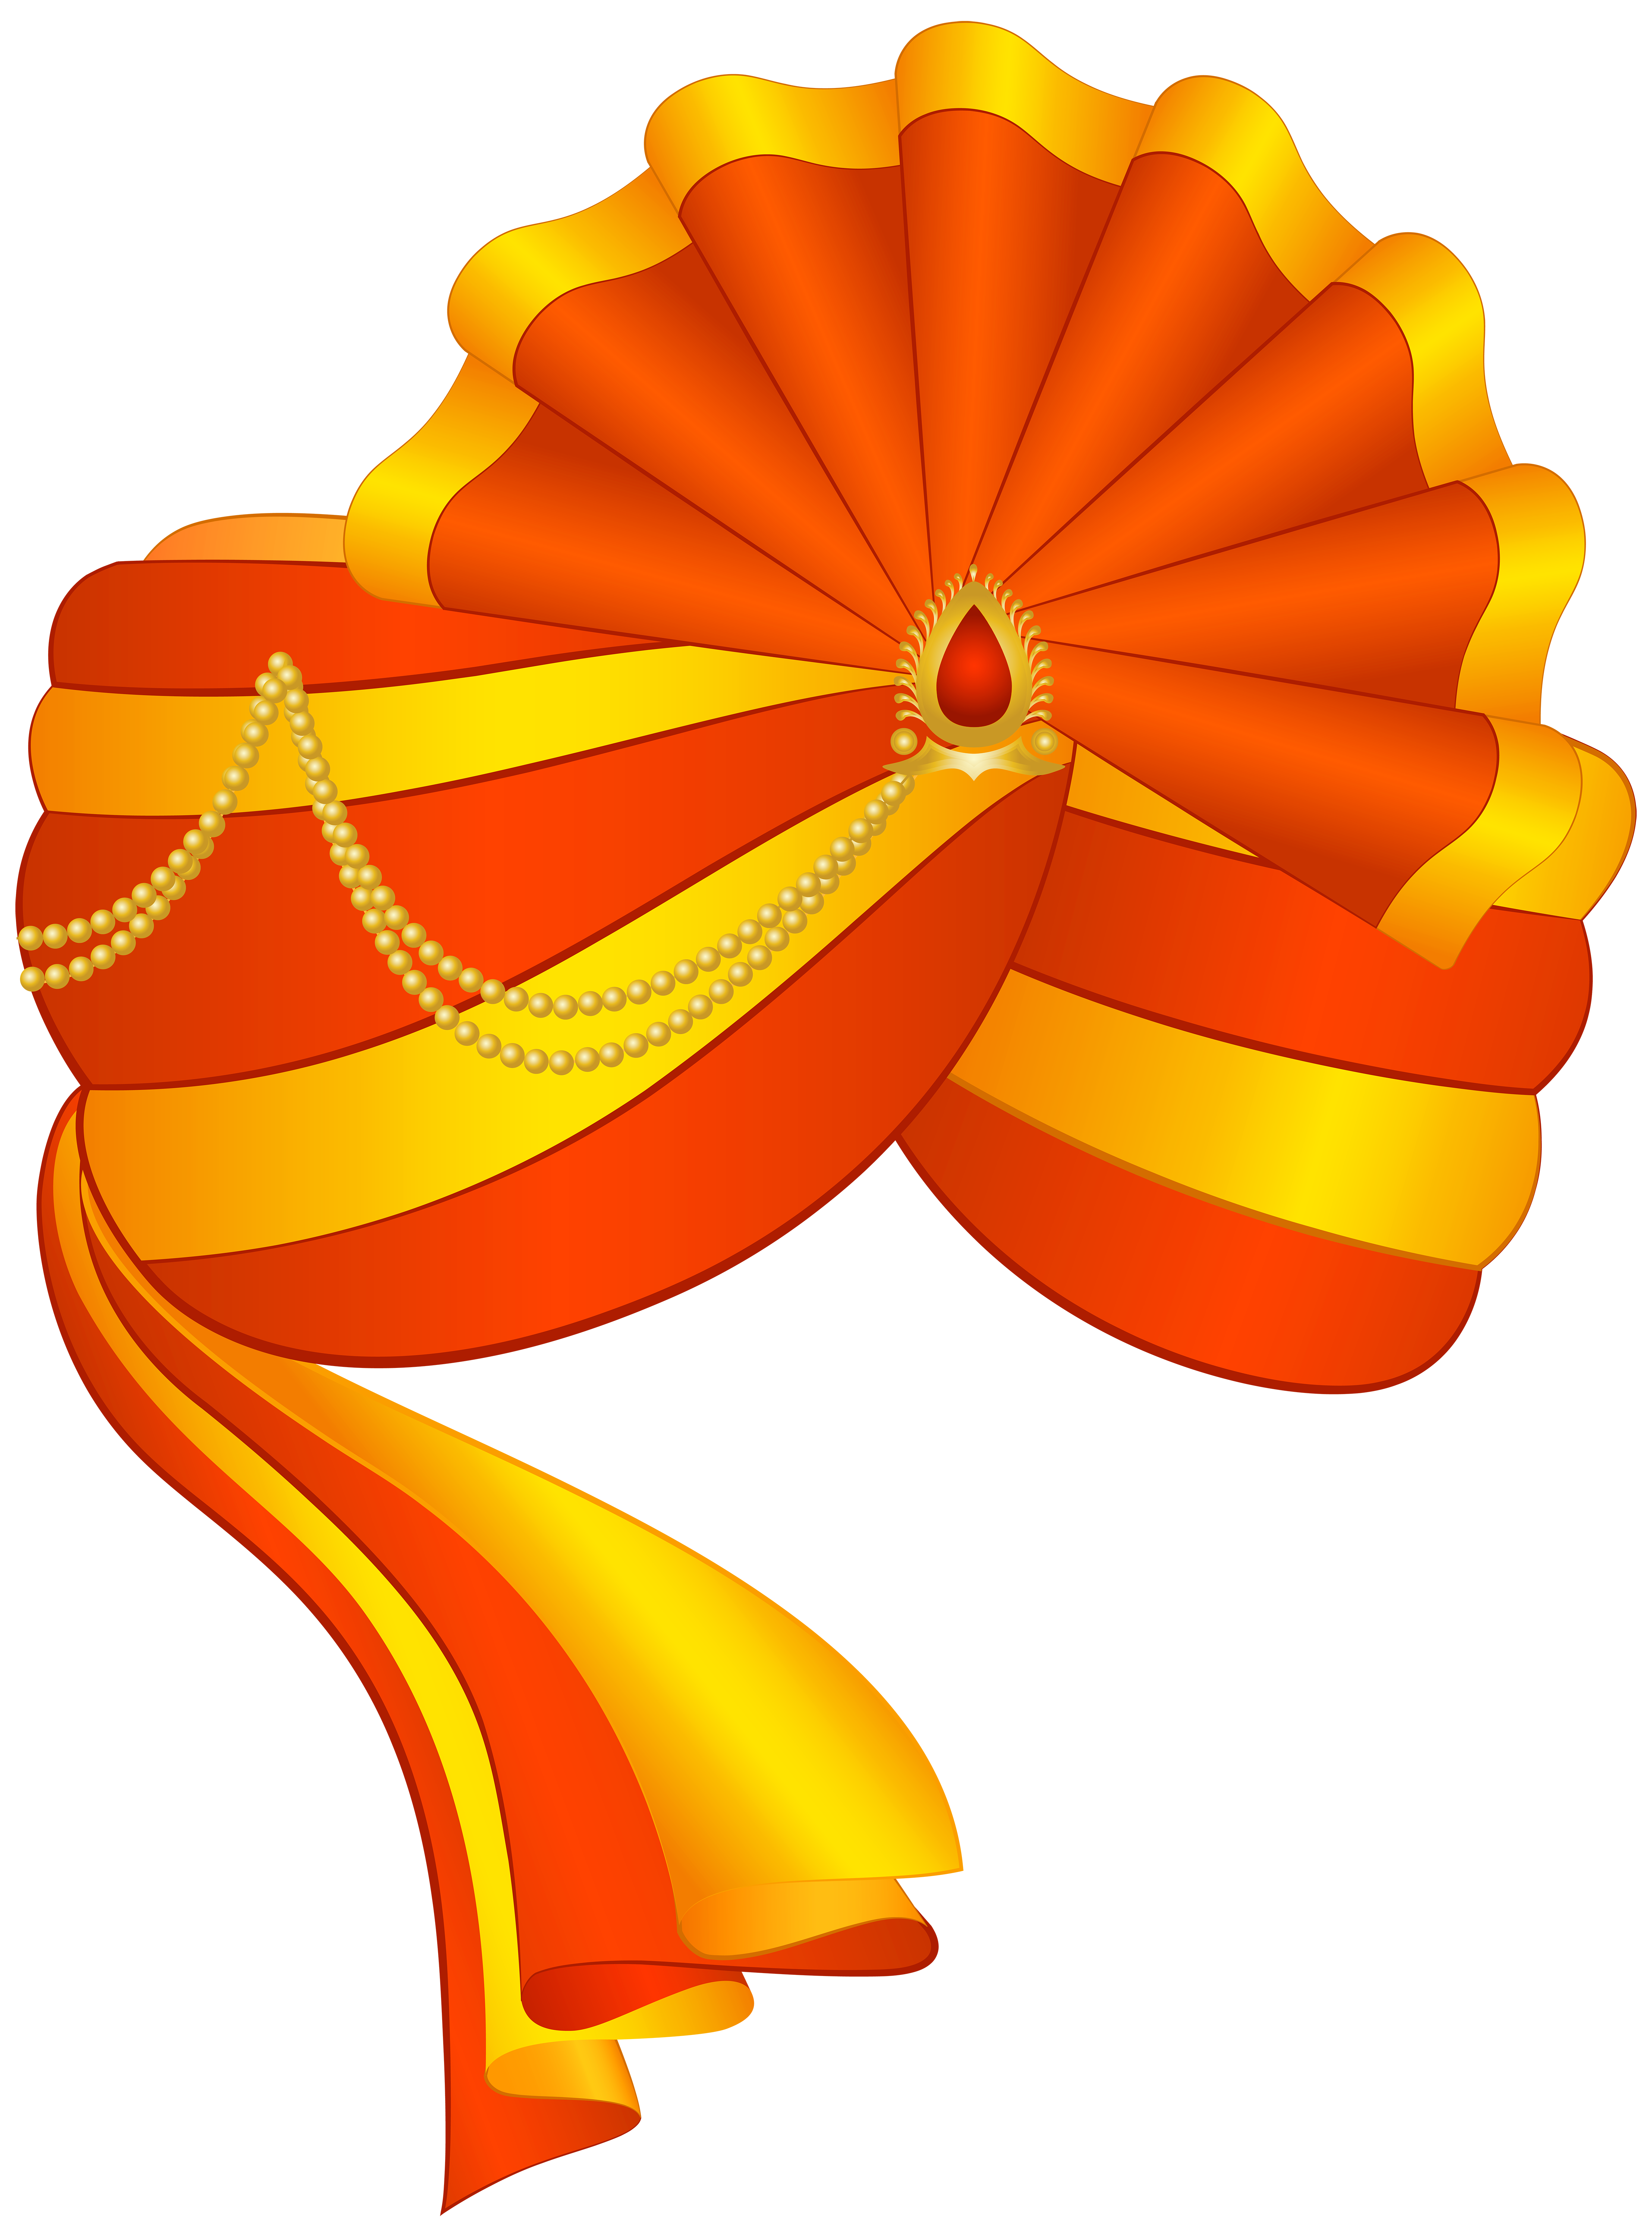 Indian Turban Png Transparent Clip Art Image Gallery Yopriceville High Quality Images And Transparent Png Free Clipart